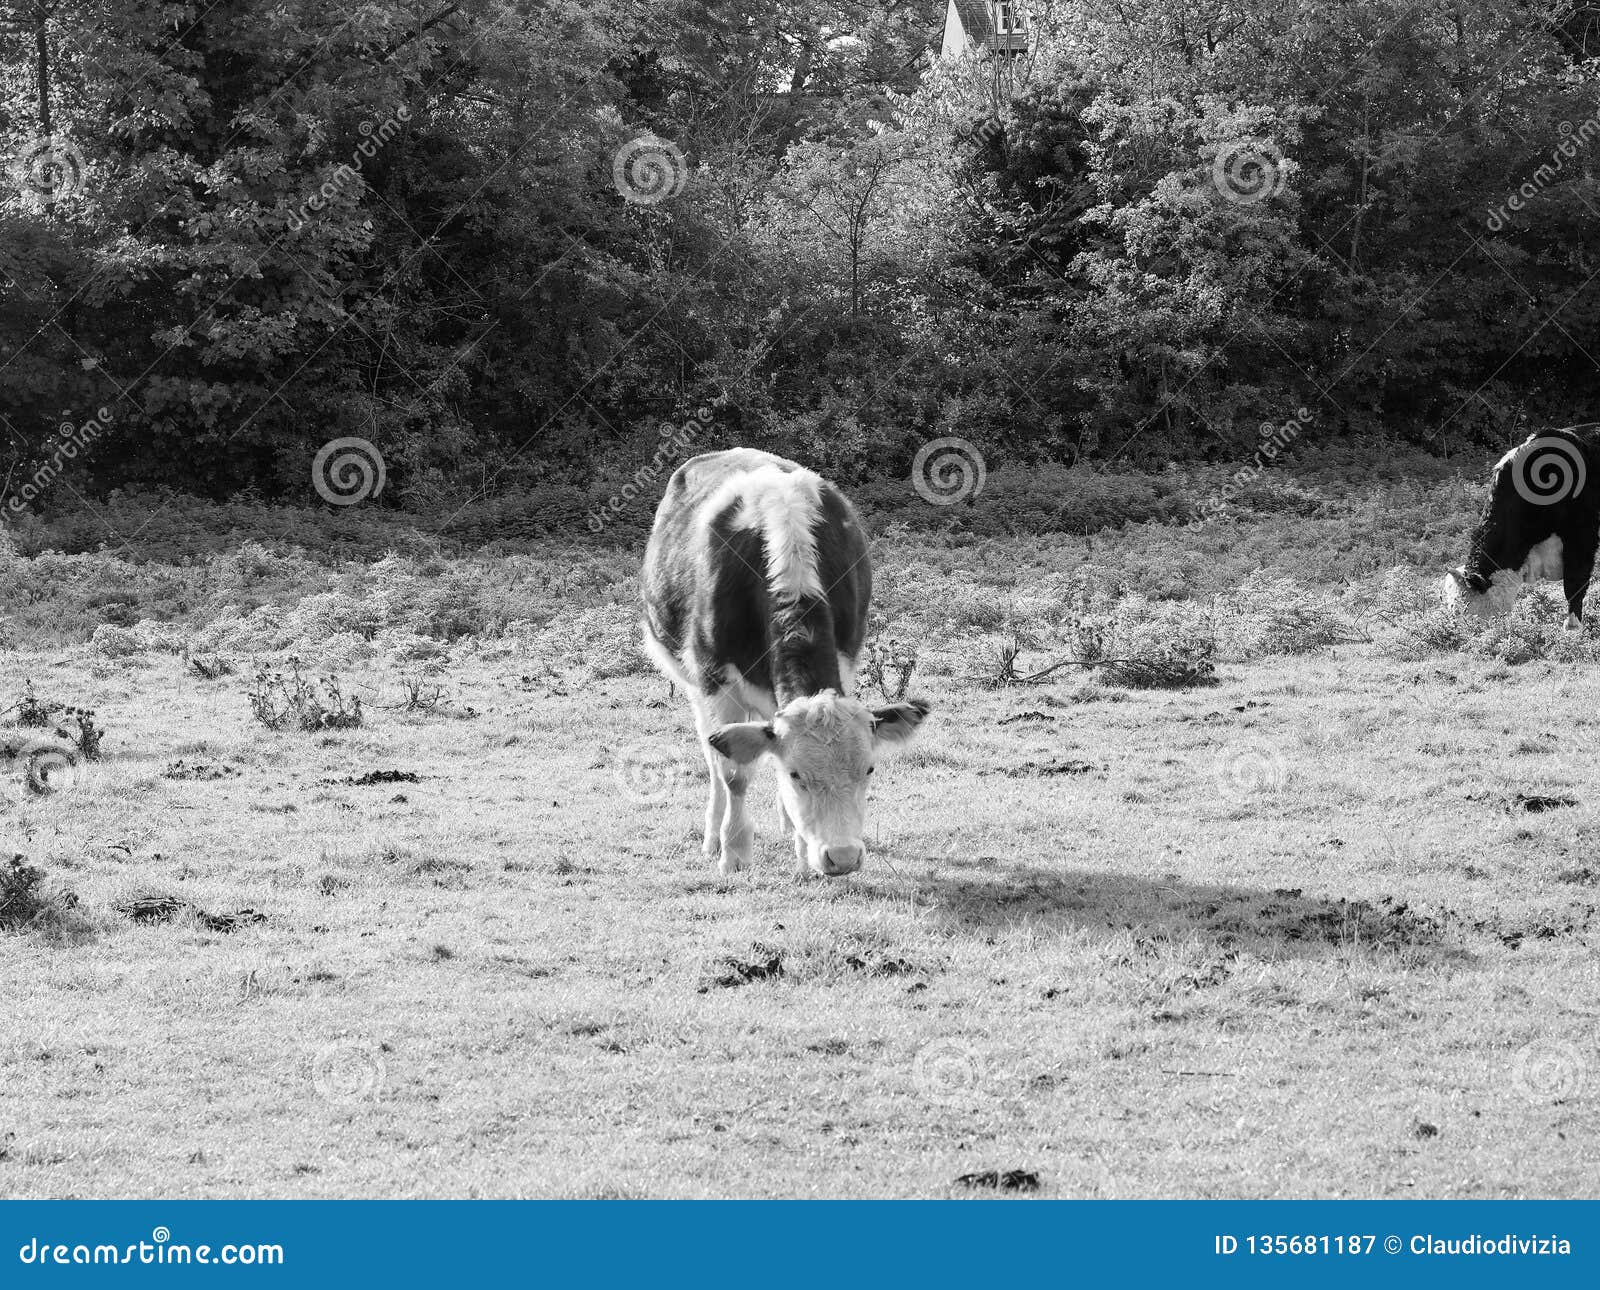 coe fen meadowland cattle in cambridge in black and white